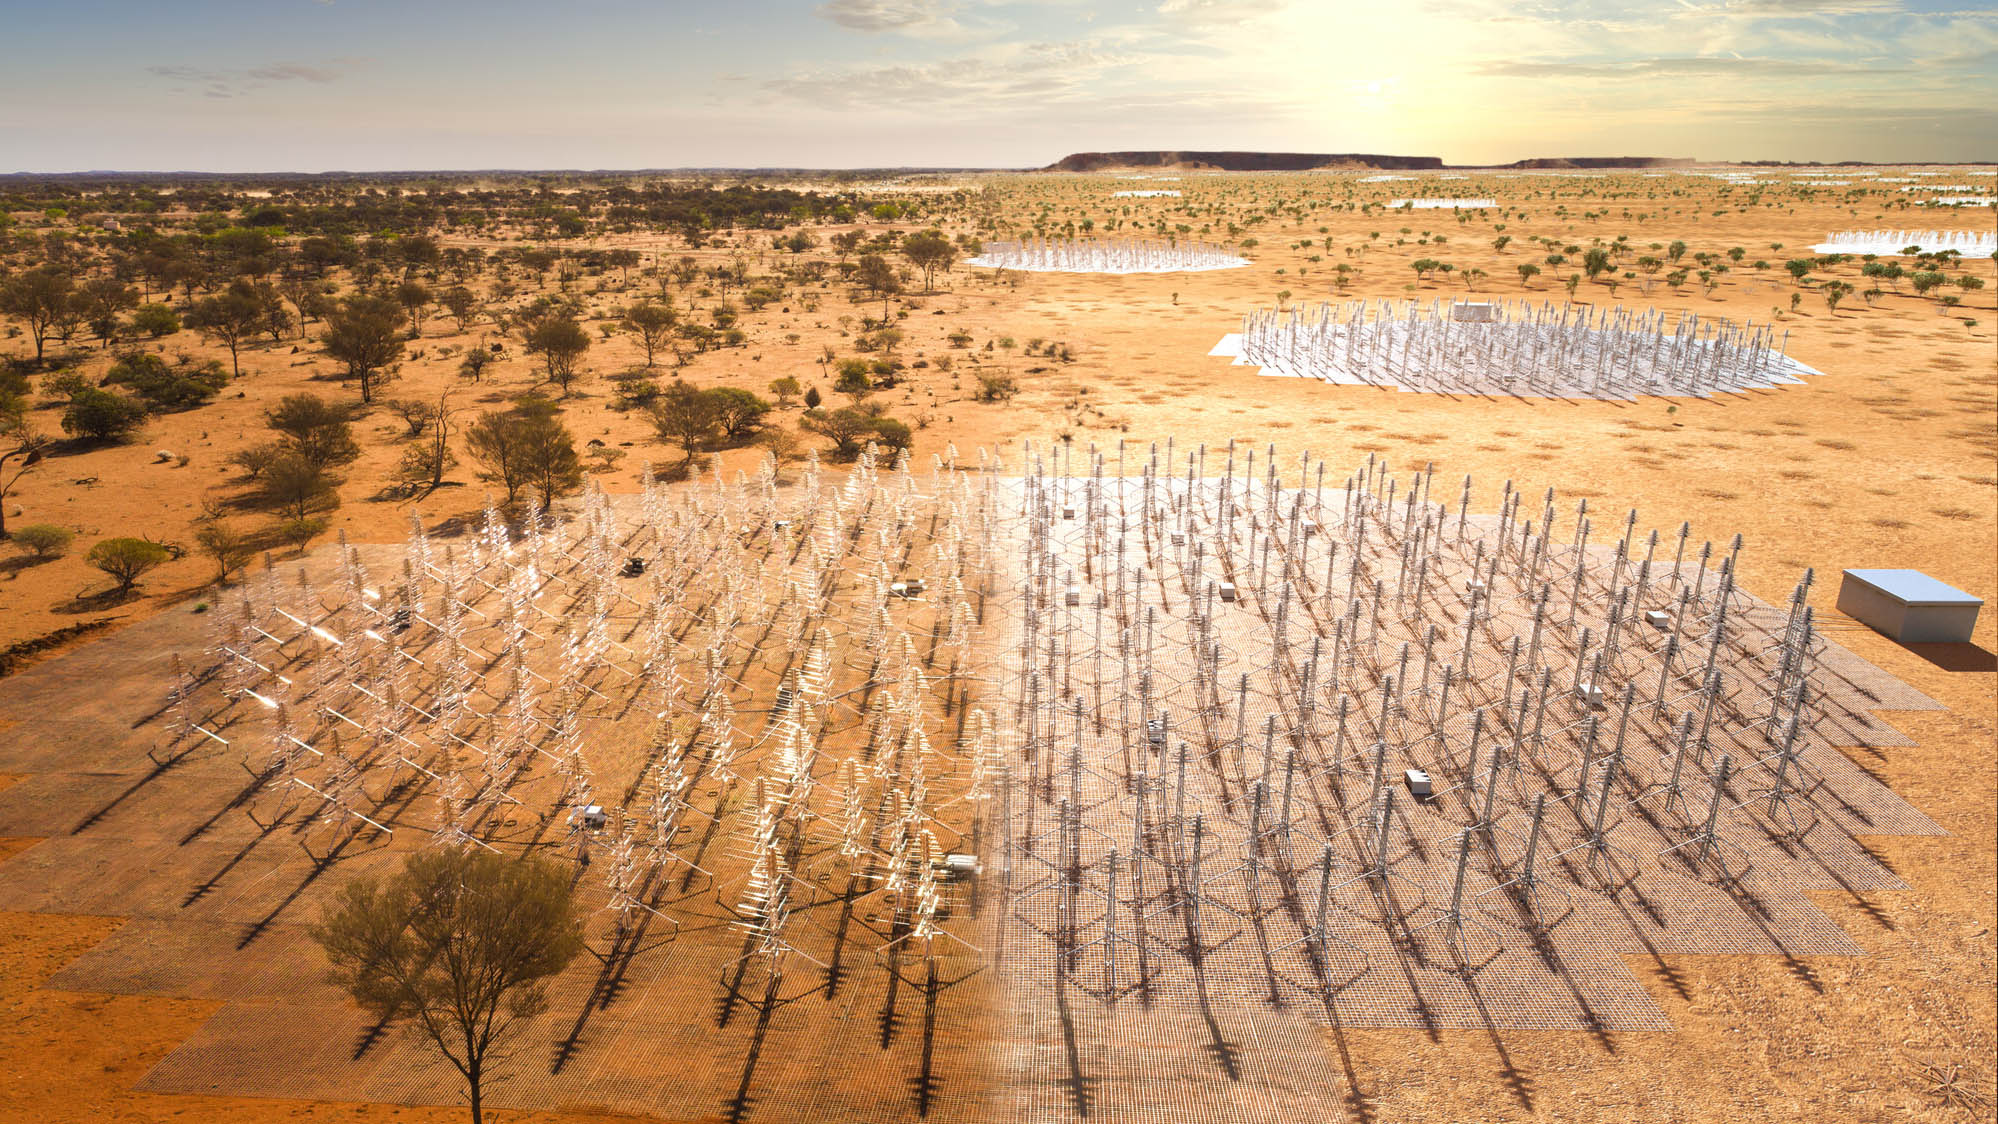 The Square Kilometer Array's site in Australia will rely on 130,000 Christmas-tree like dipole antennas to listen to radio waves emitted by objects in the most distant universe.